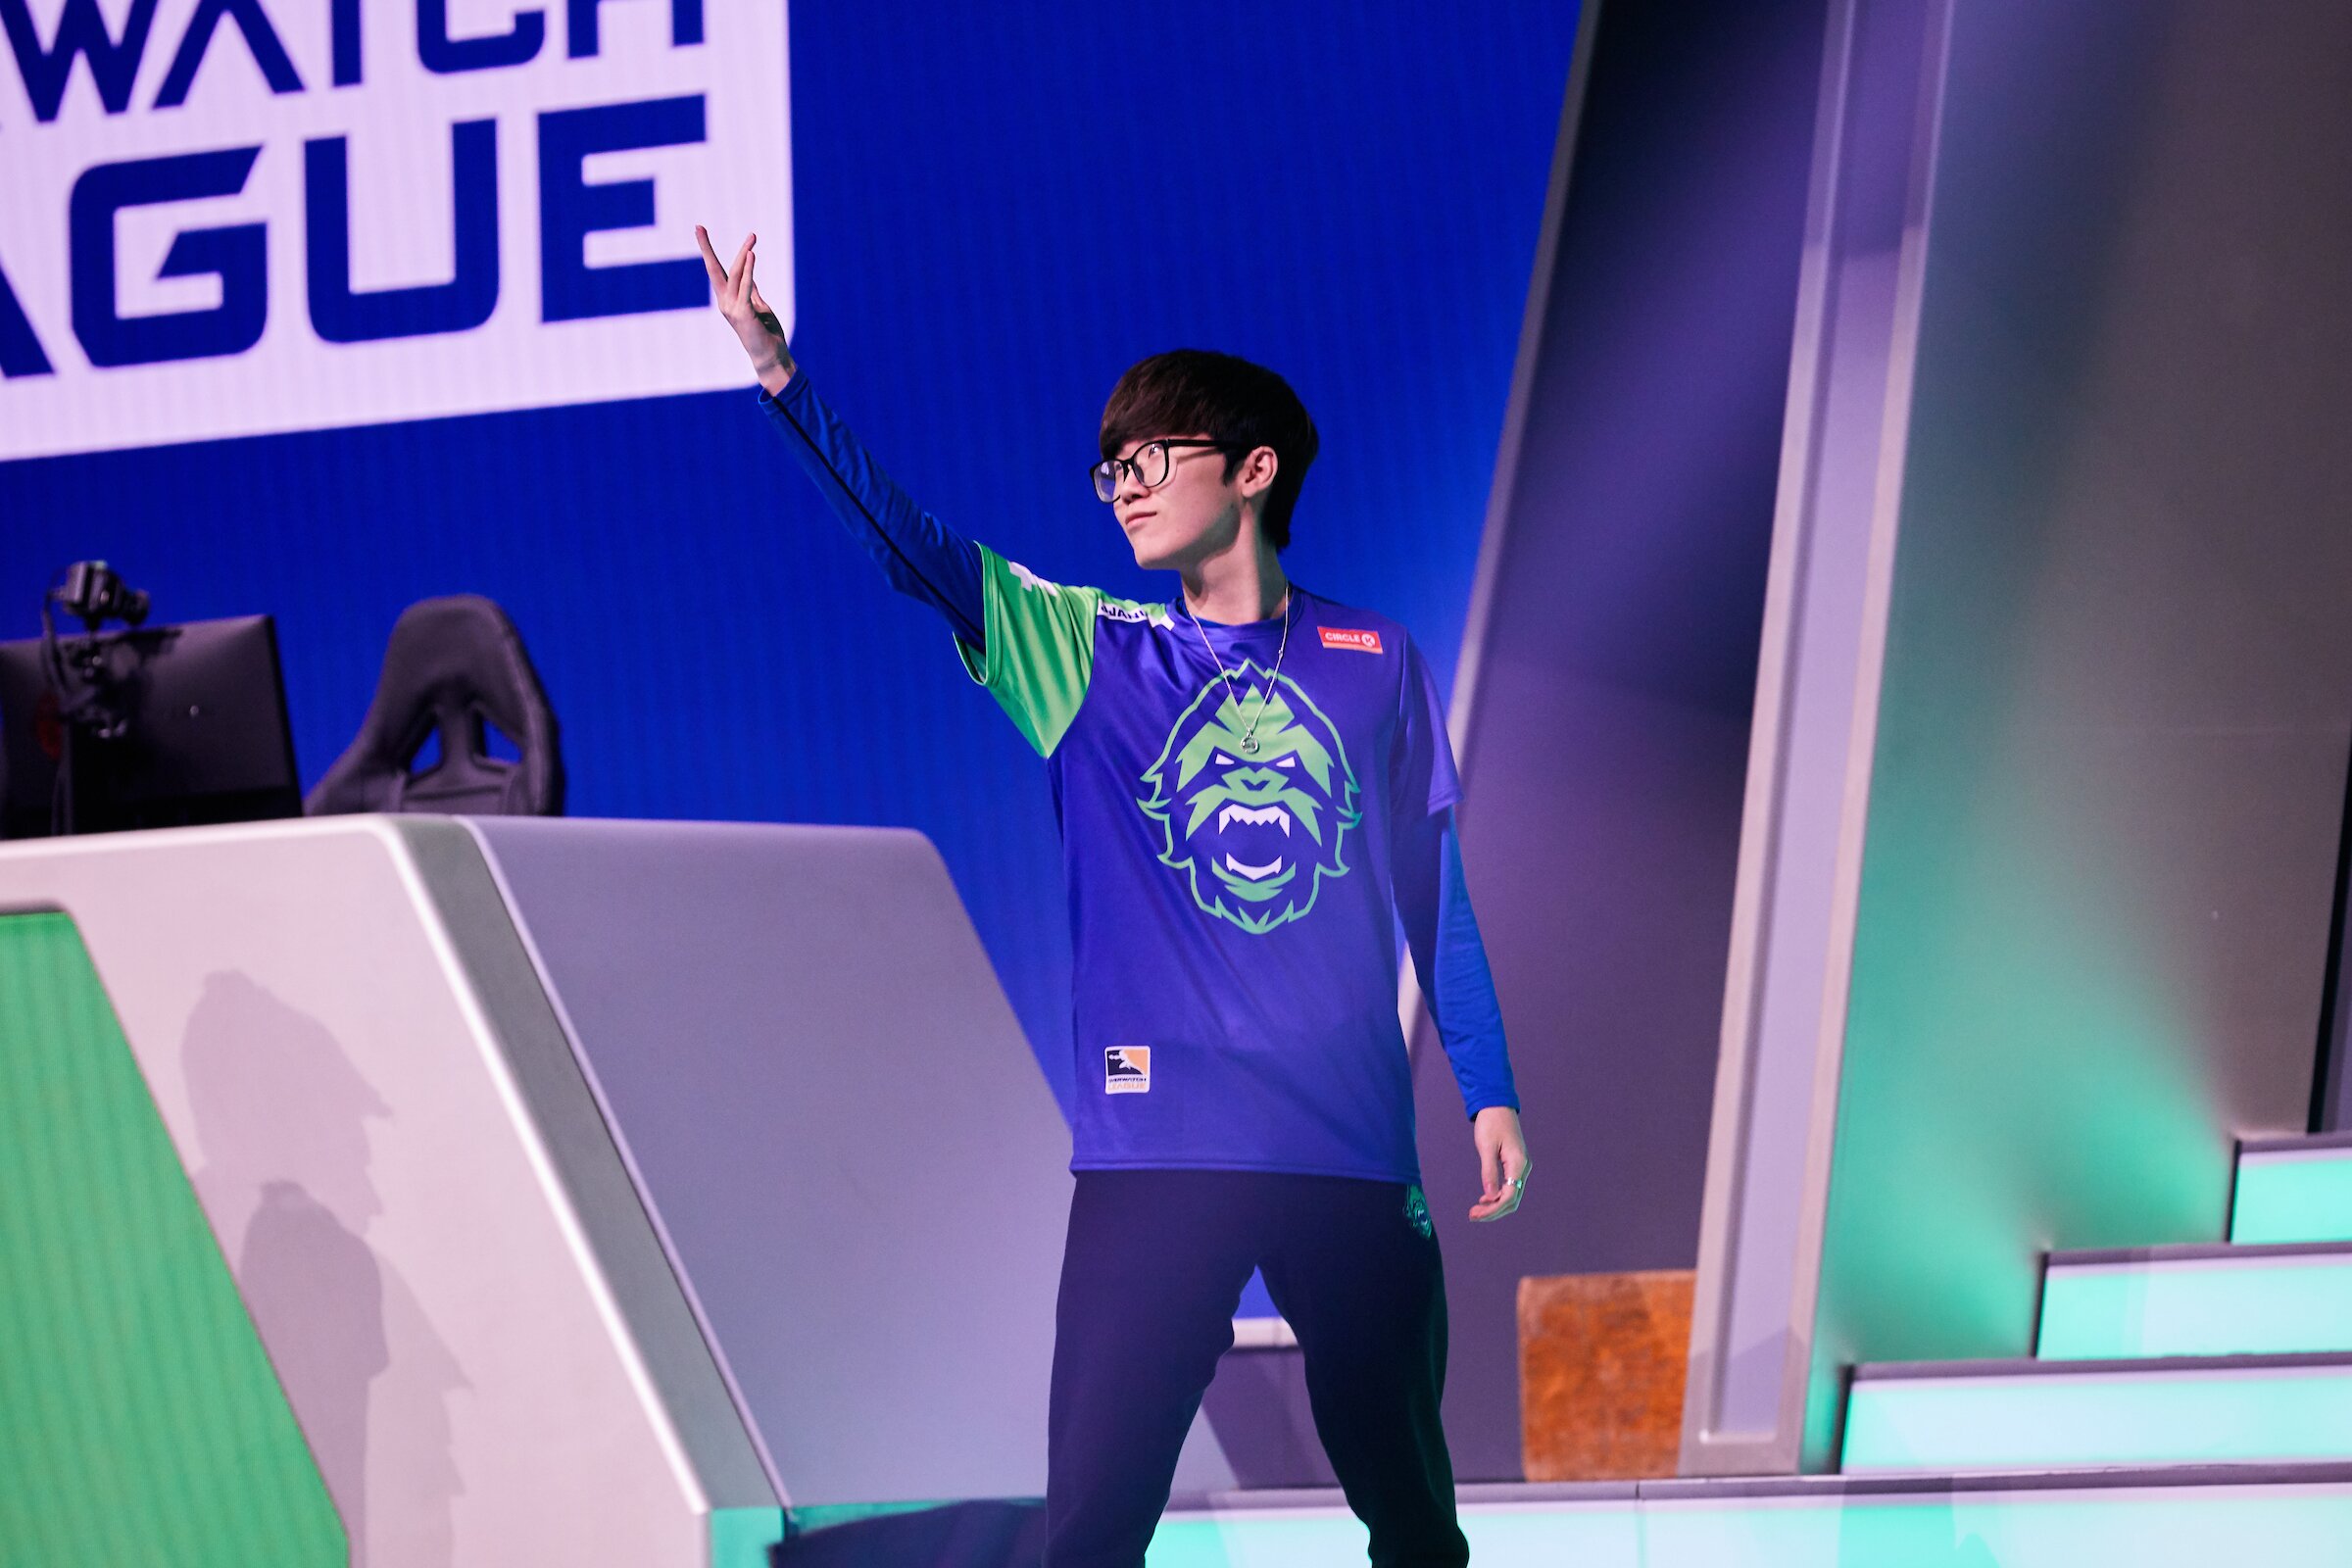 JJANU has signed with the Washington Justice along with former Vancouver teammate Stitch. (Image via Robert Paul for Blizzard Entertainment)